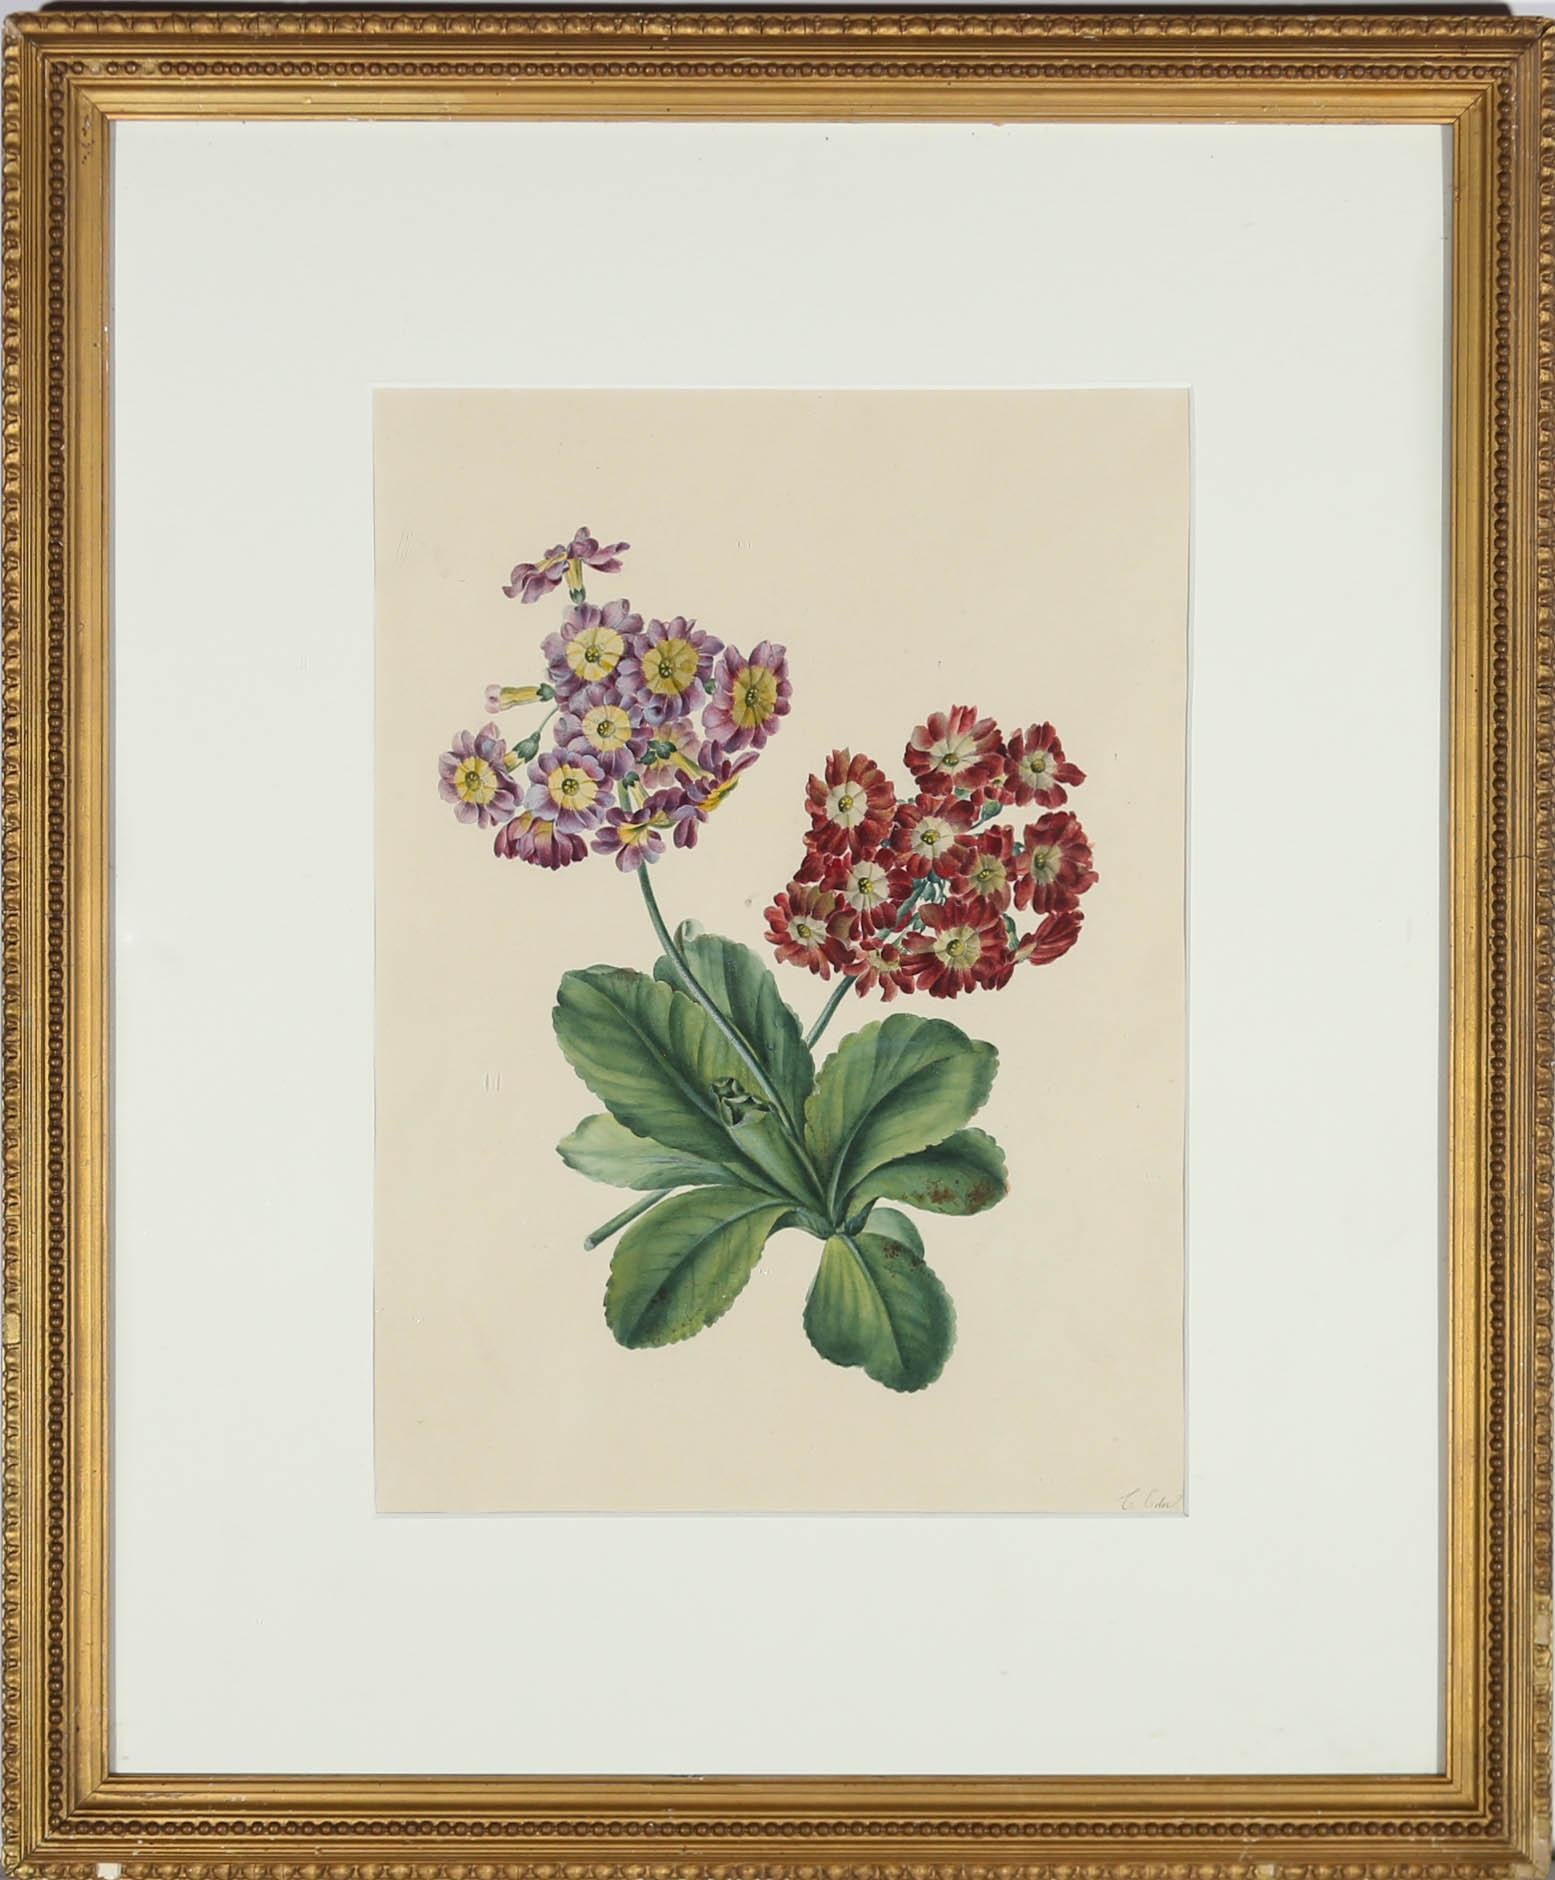 This delightful study depicts an intricate botanical study of evening primroses in pink and red. Signed to the lower right. Well presented in a gilt frame with beaded and lambs tongue running patterns. On paper.
